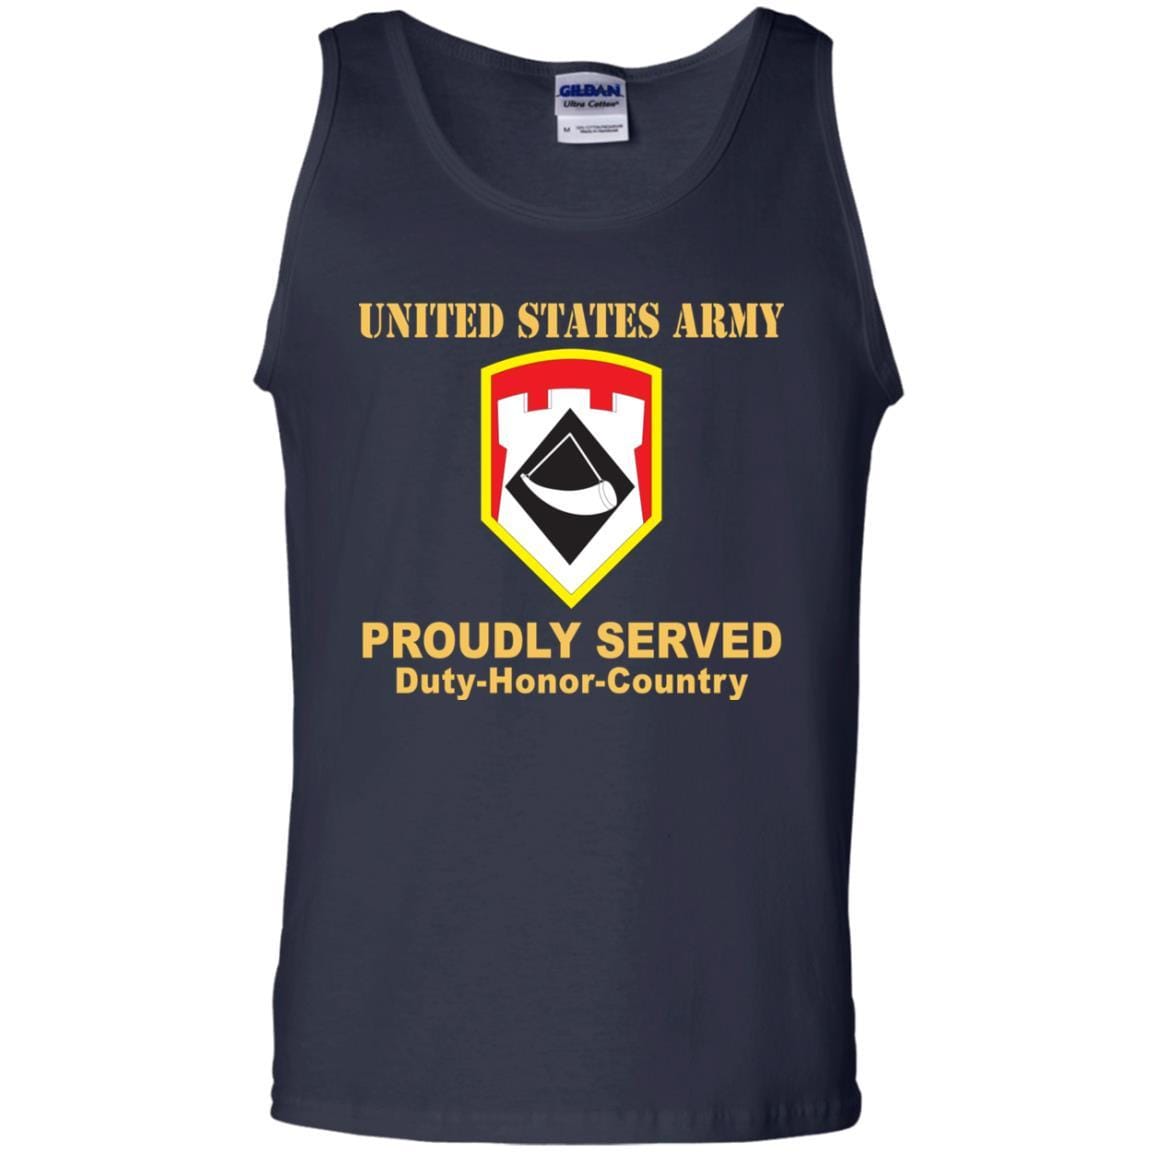 US ARMY 111TH ENGINEER BRIGADE- Proudly Served T-Shirt On Front For Men-TShirt-Army-Veterans Nation